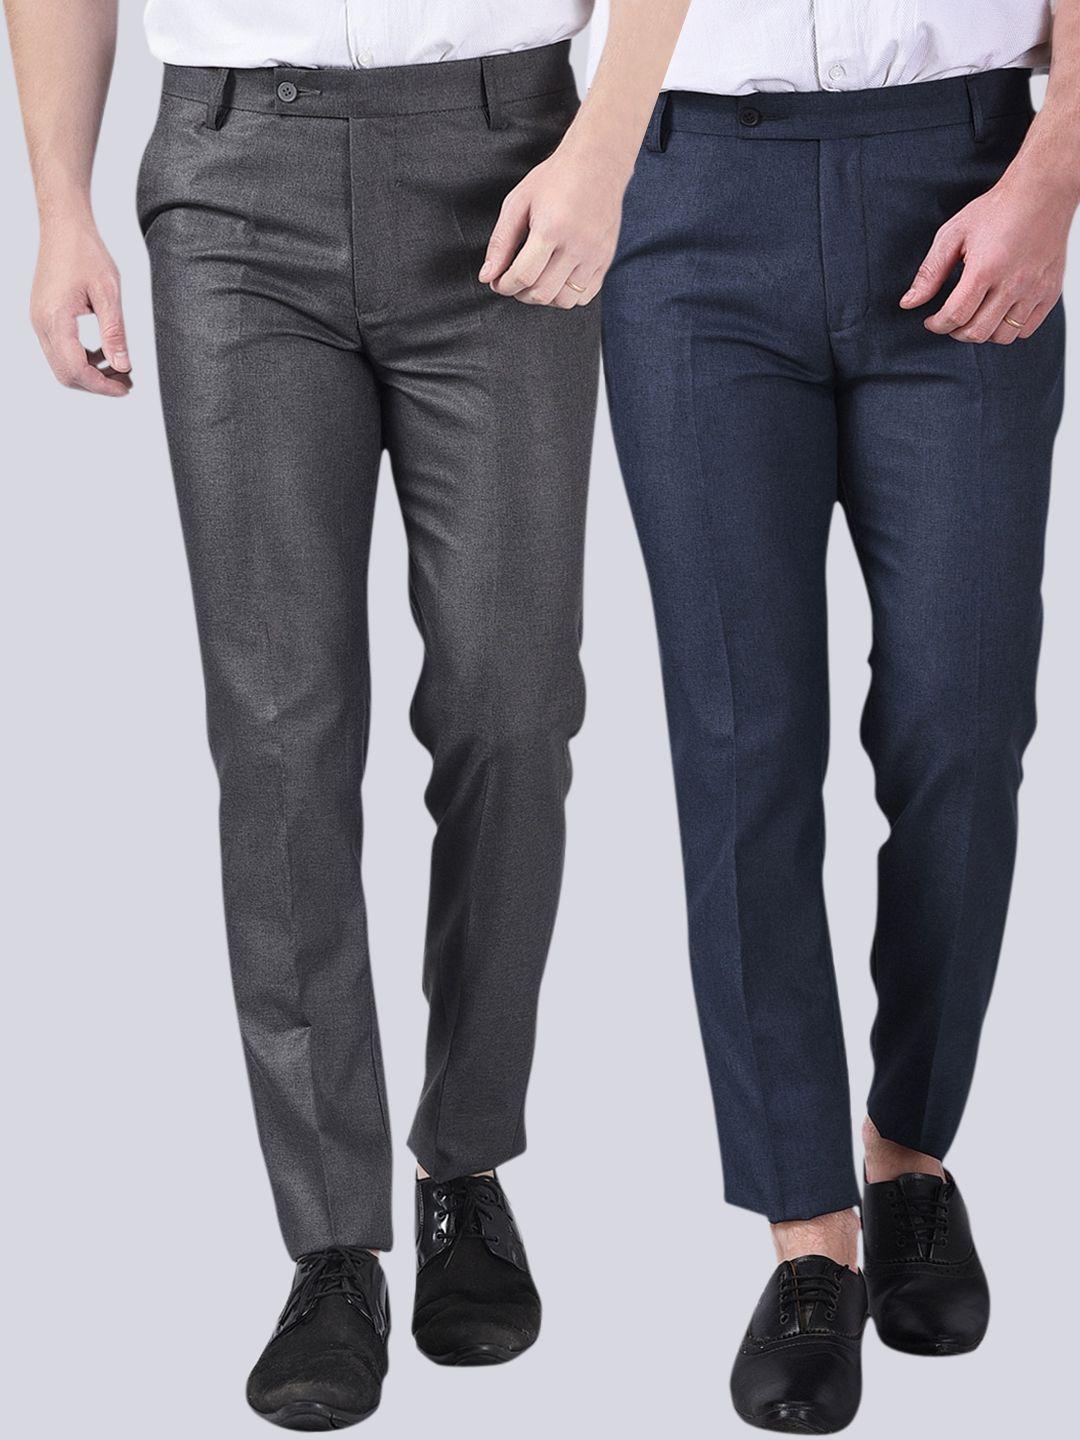 ad & av men steel and blue pack of 2 comfort mid rise easy wash formal trousers